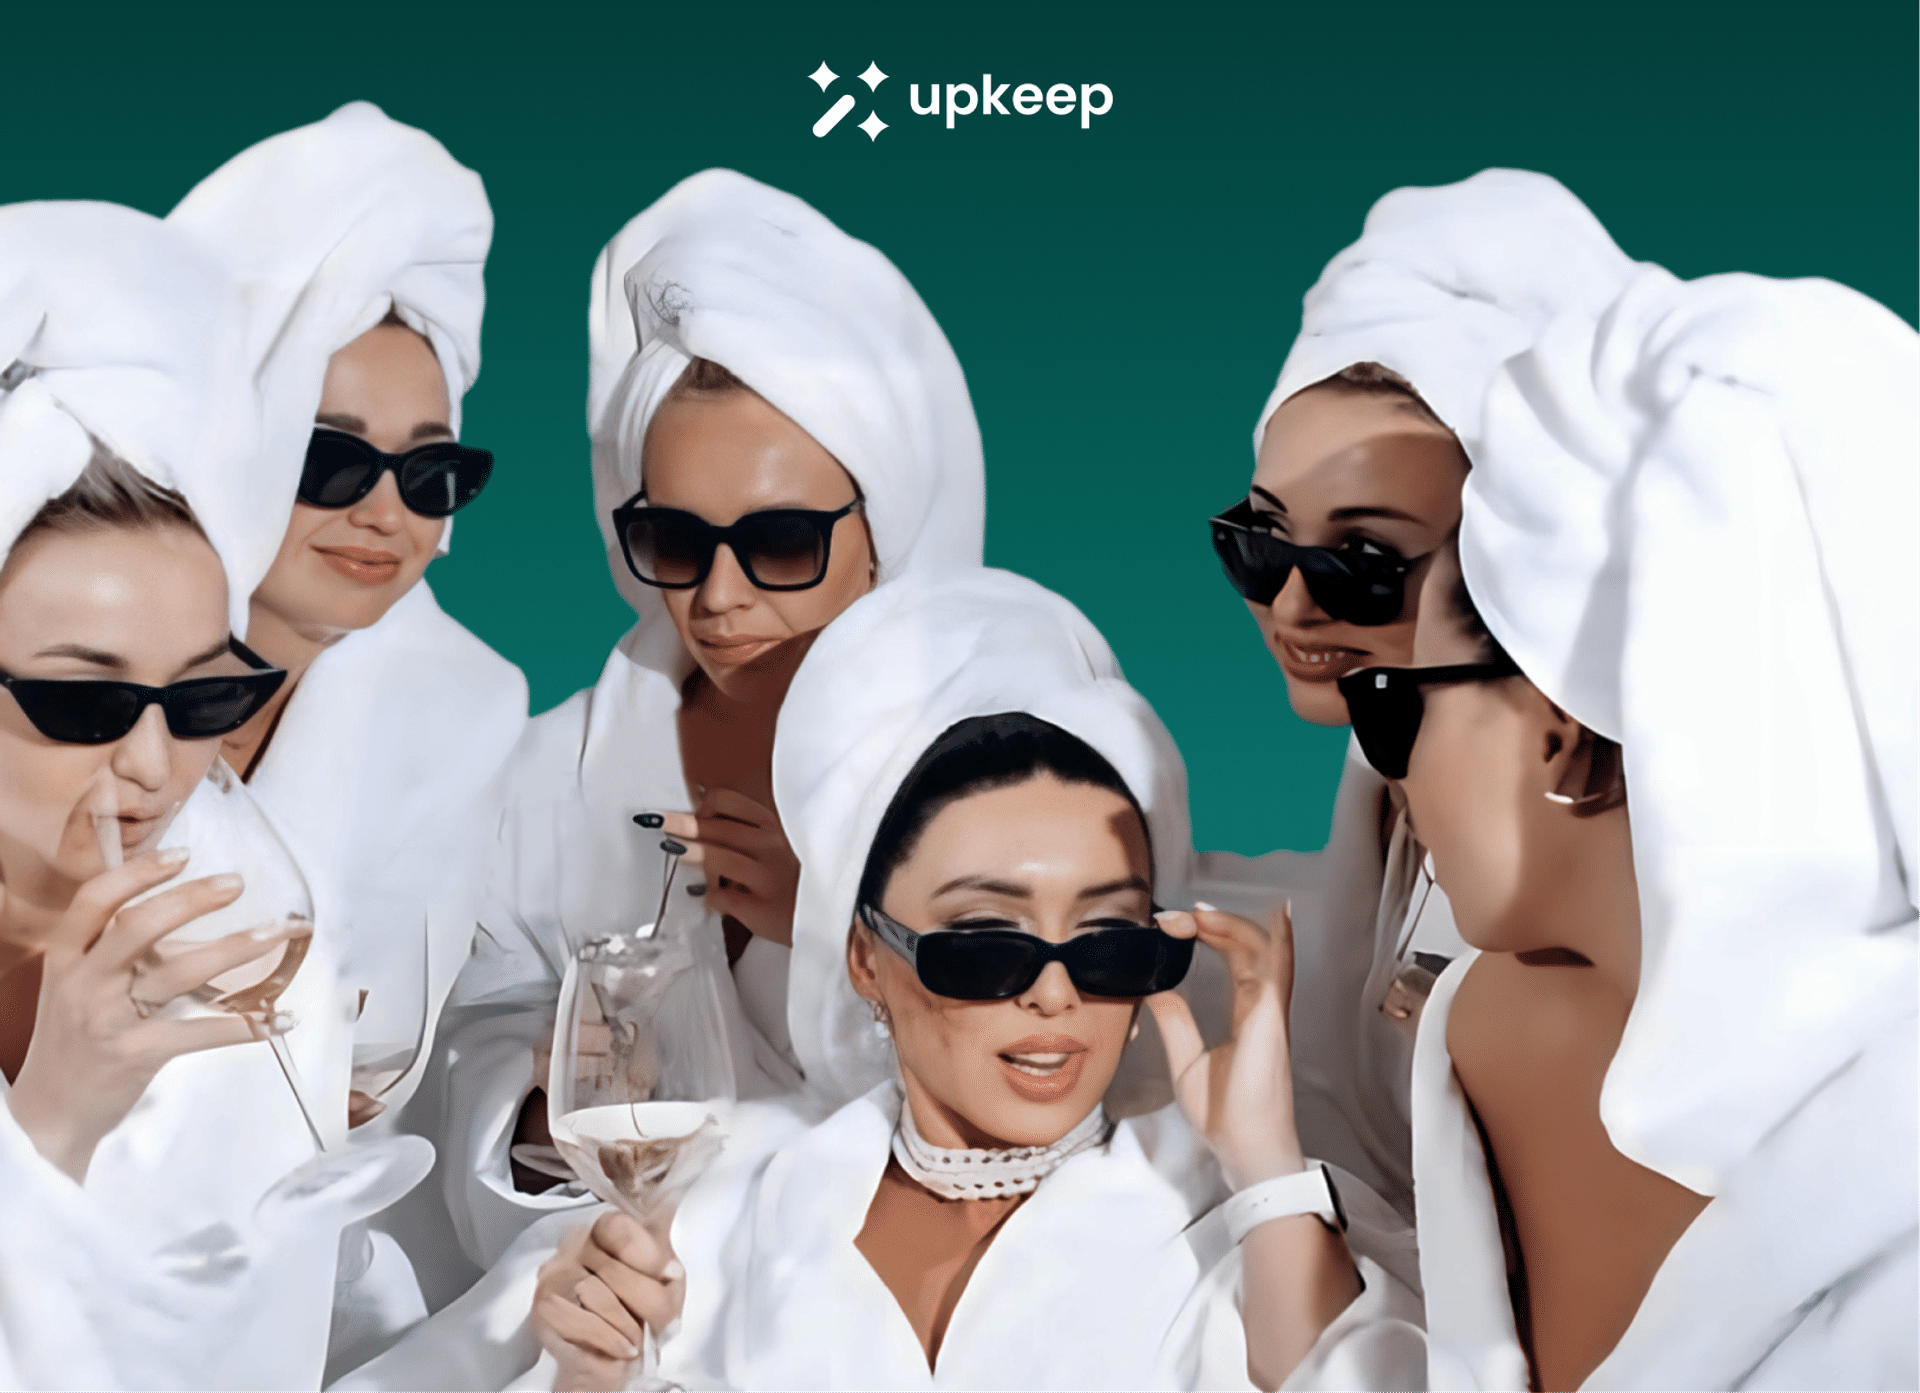 Upkeep’s Glow Up Party: Mobile MedSpa with Customizable Botox Treatments & More! image 1